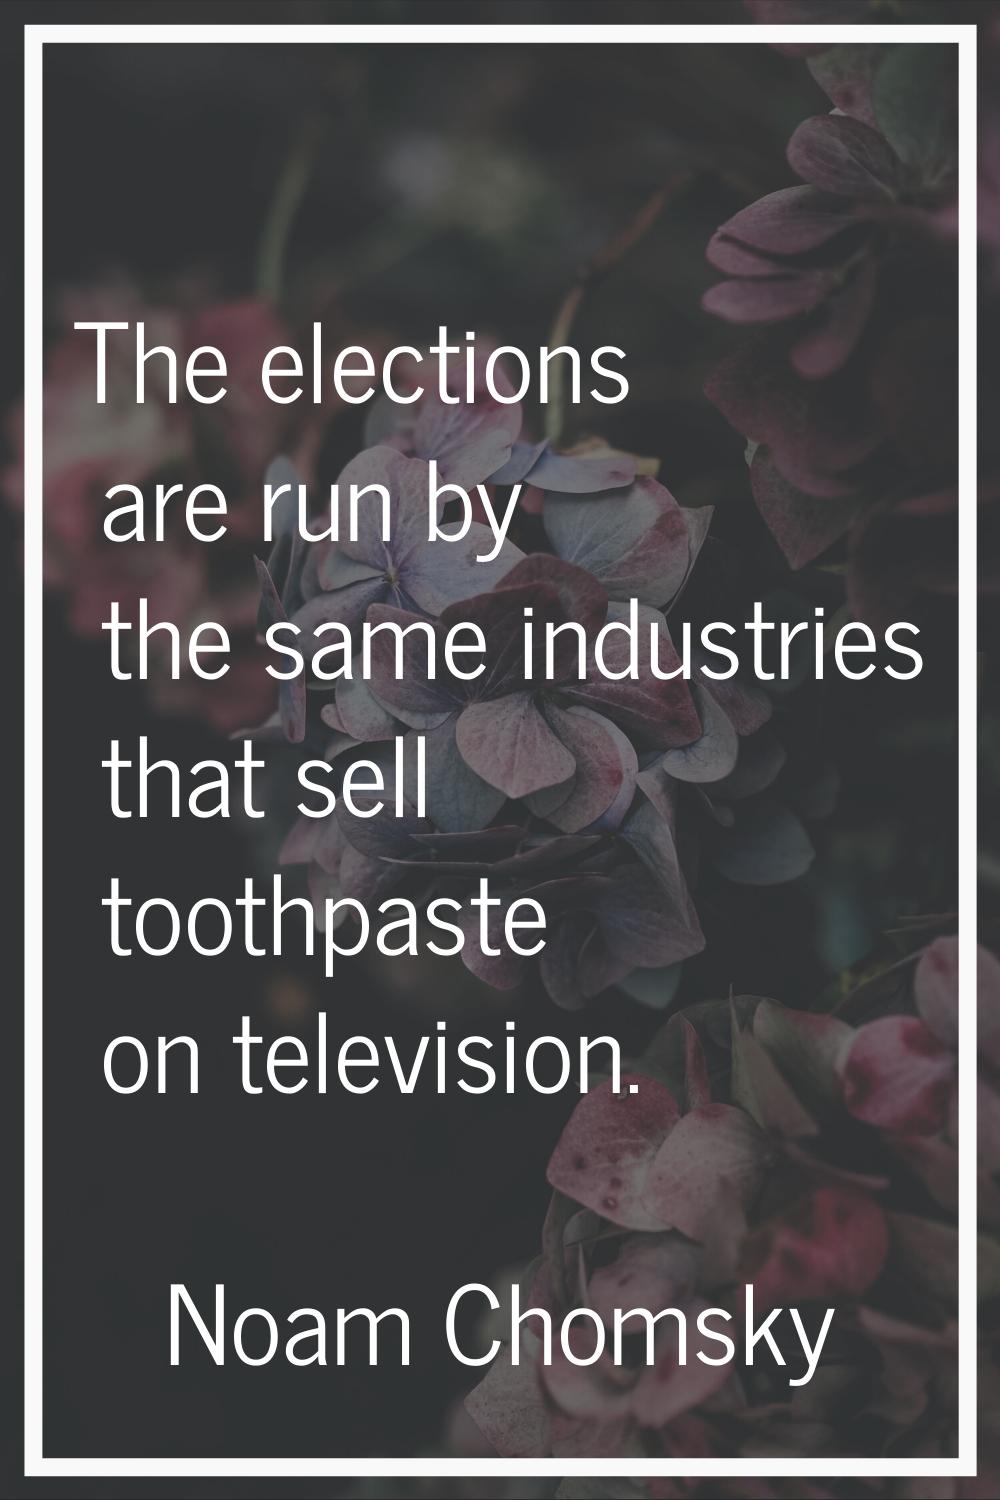 The elections are run by the same industries that sell toothpaste on television.